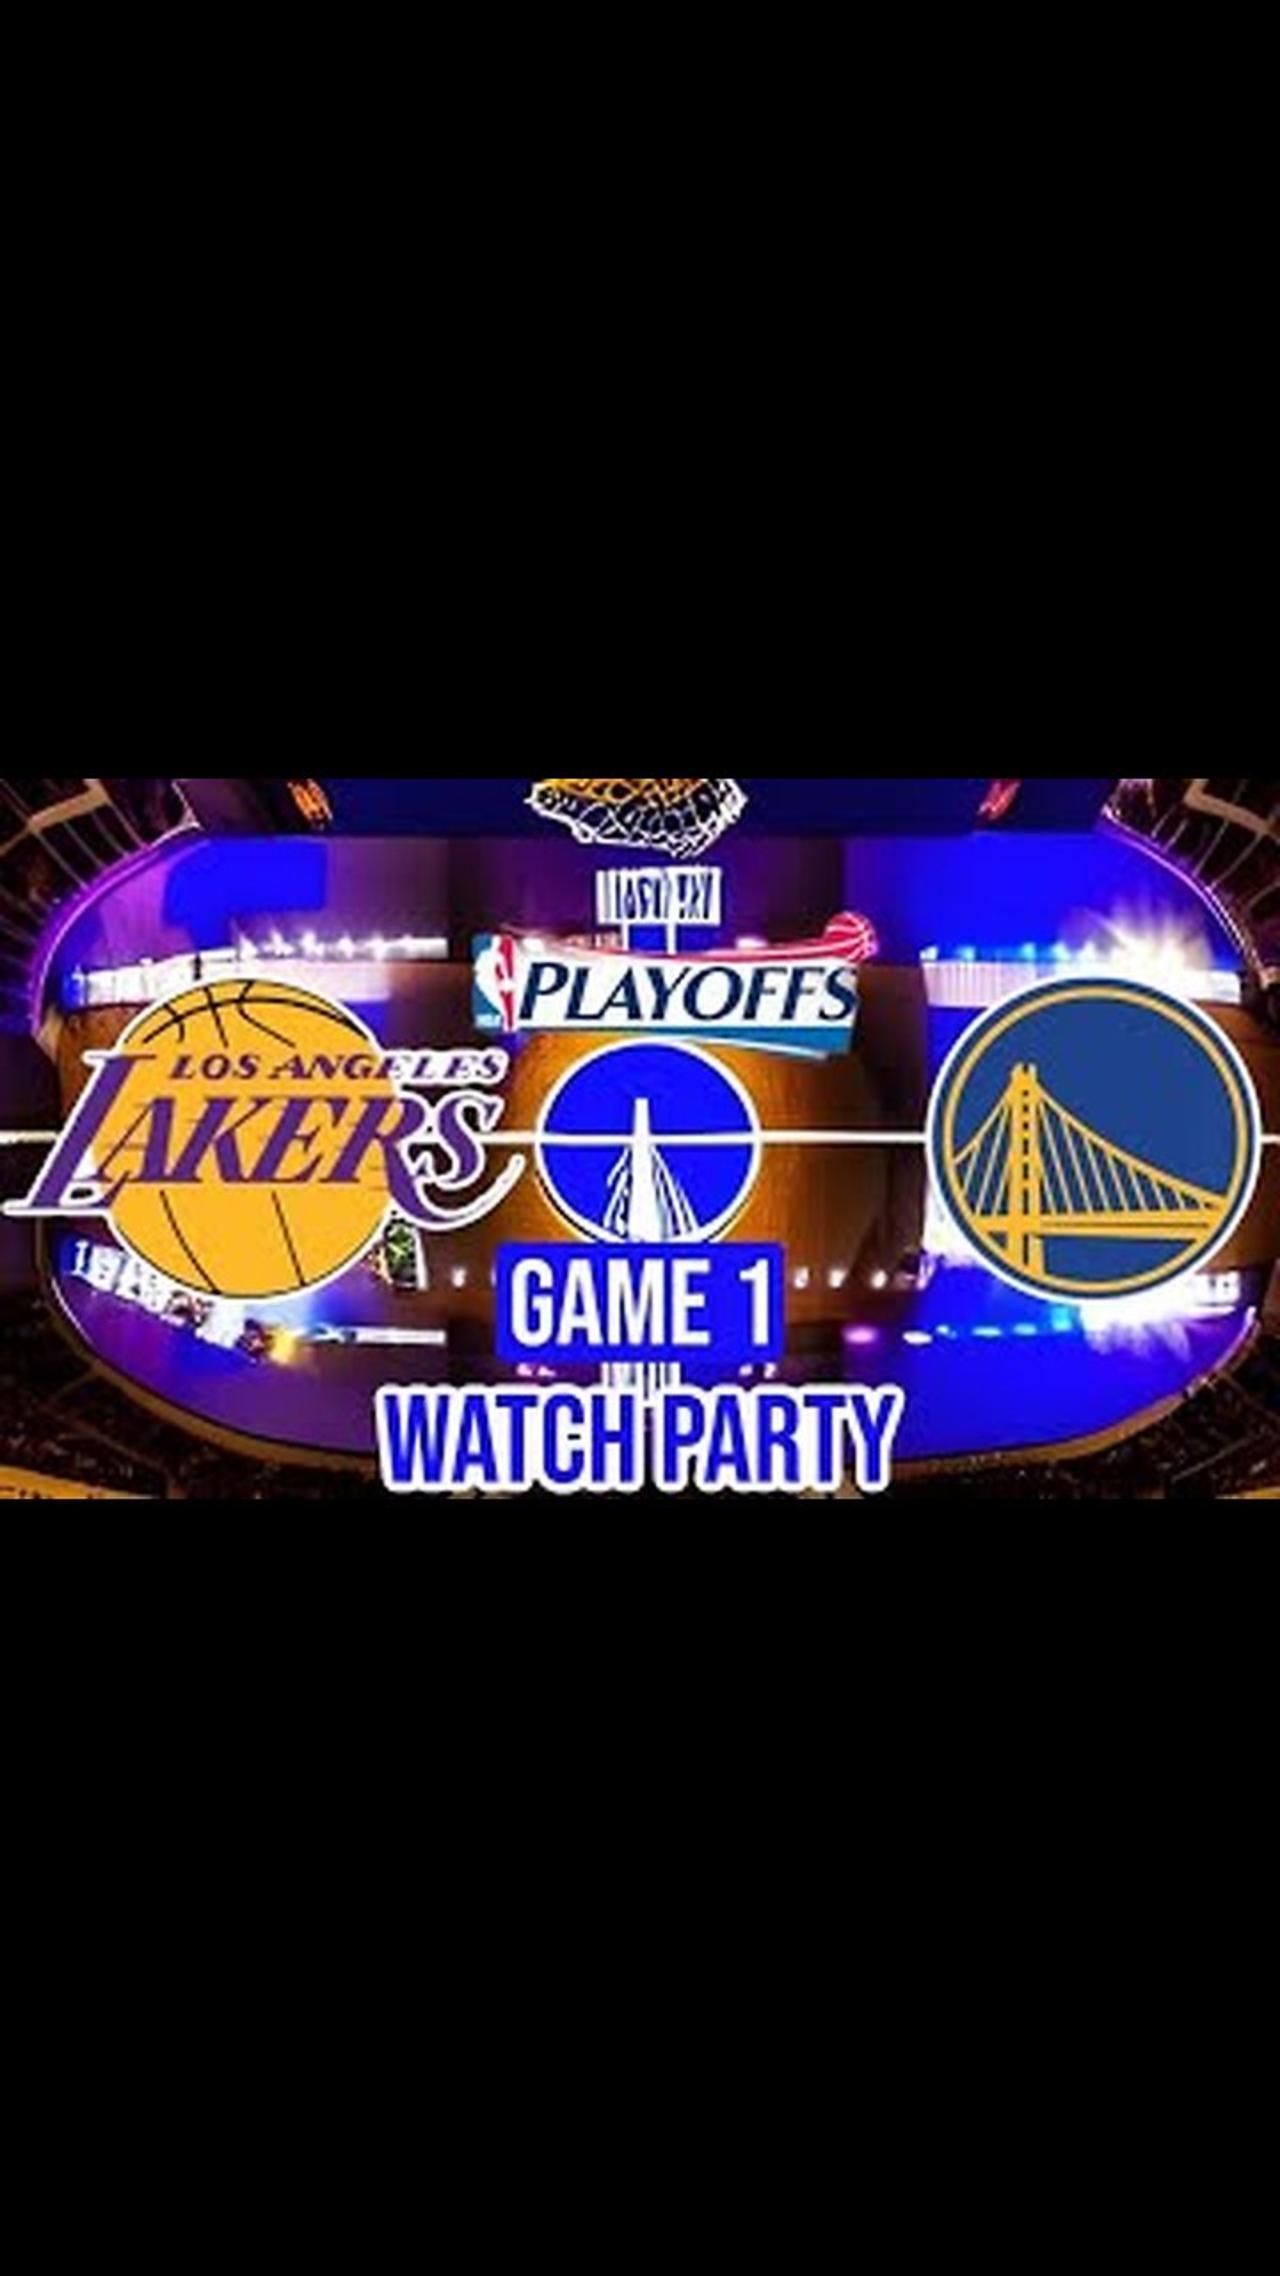 Join The Excitement: Golden State Warriors vs LA Lakers game 1 RD2 Live Watch Party